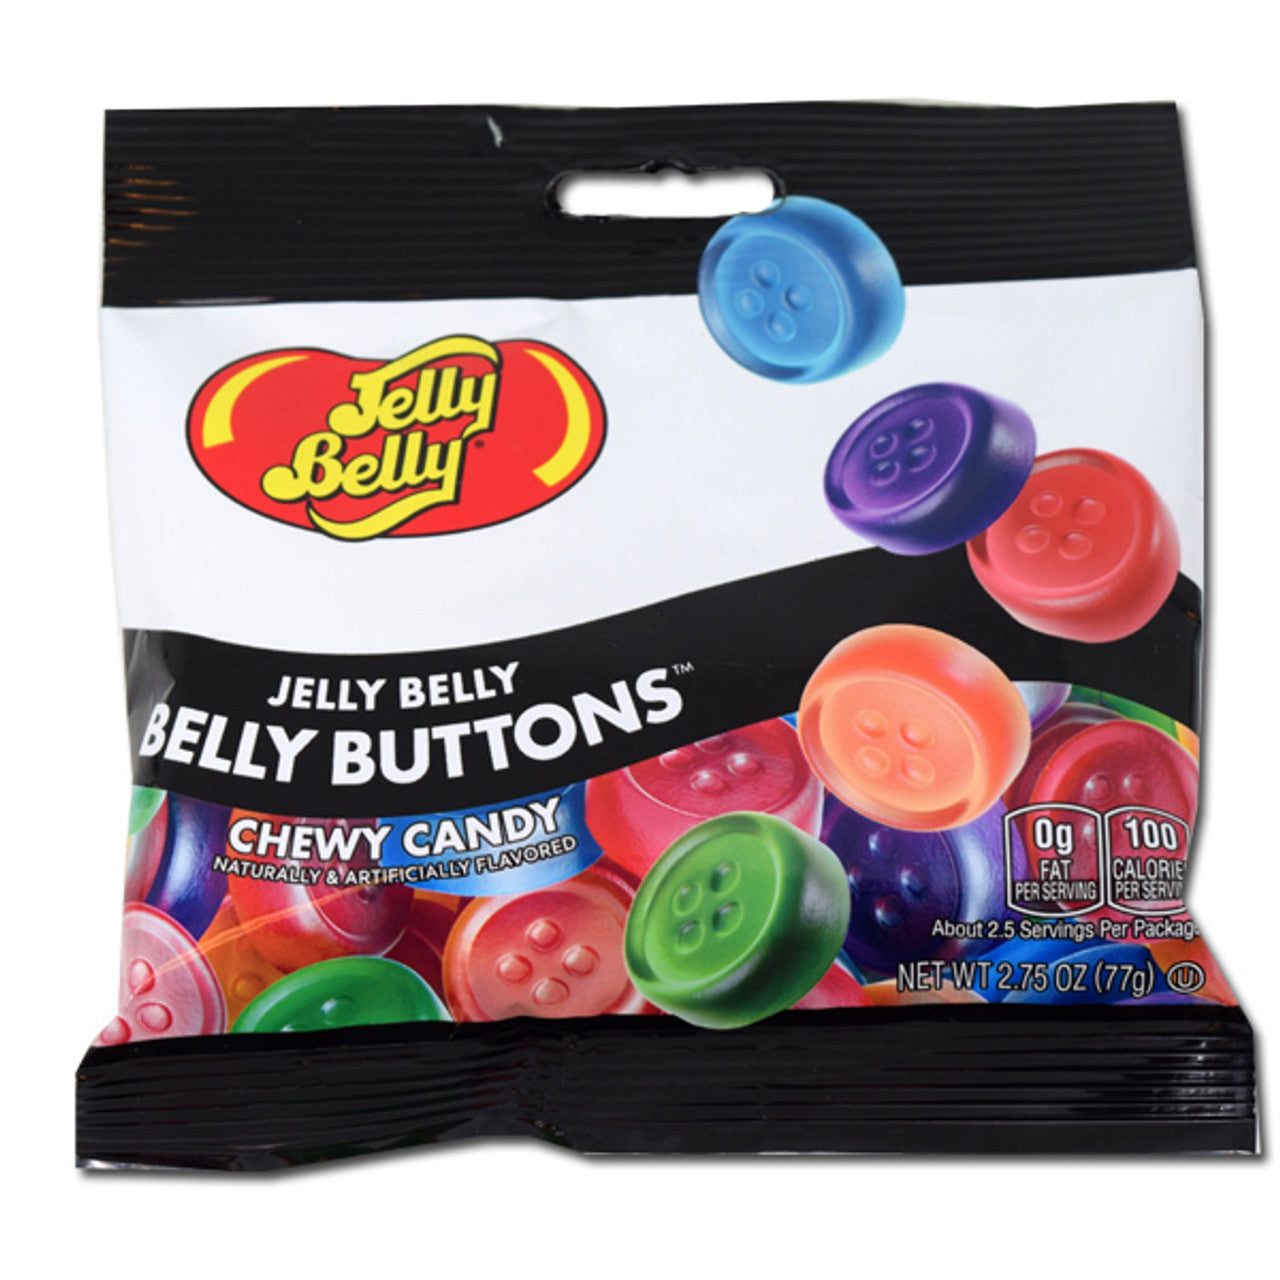 Jelly Belly Belly Buttons